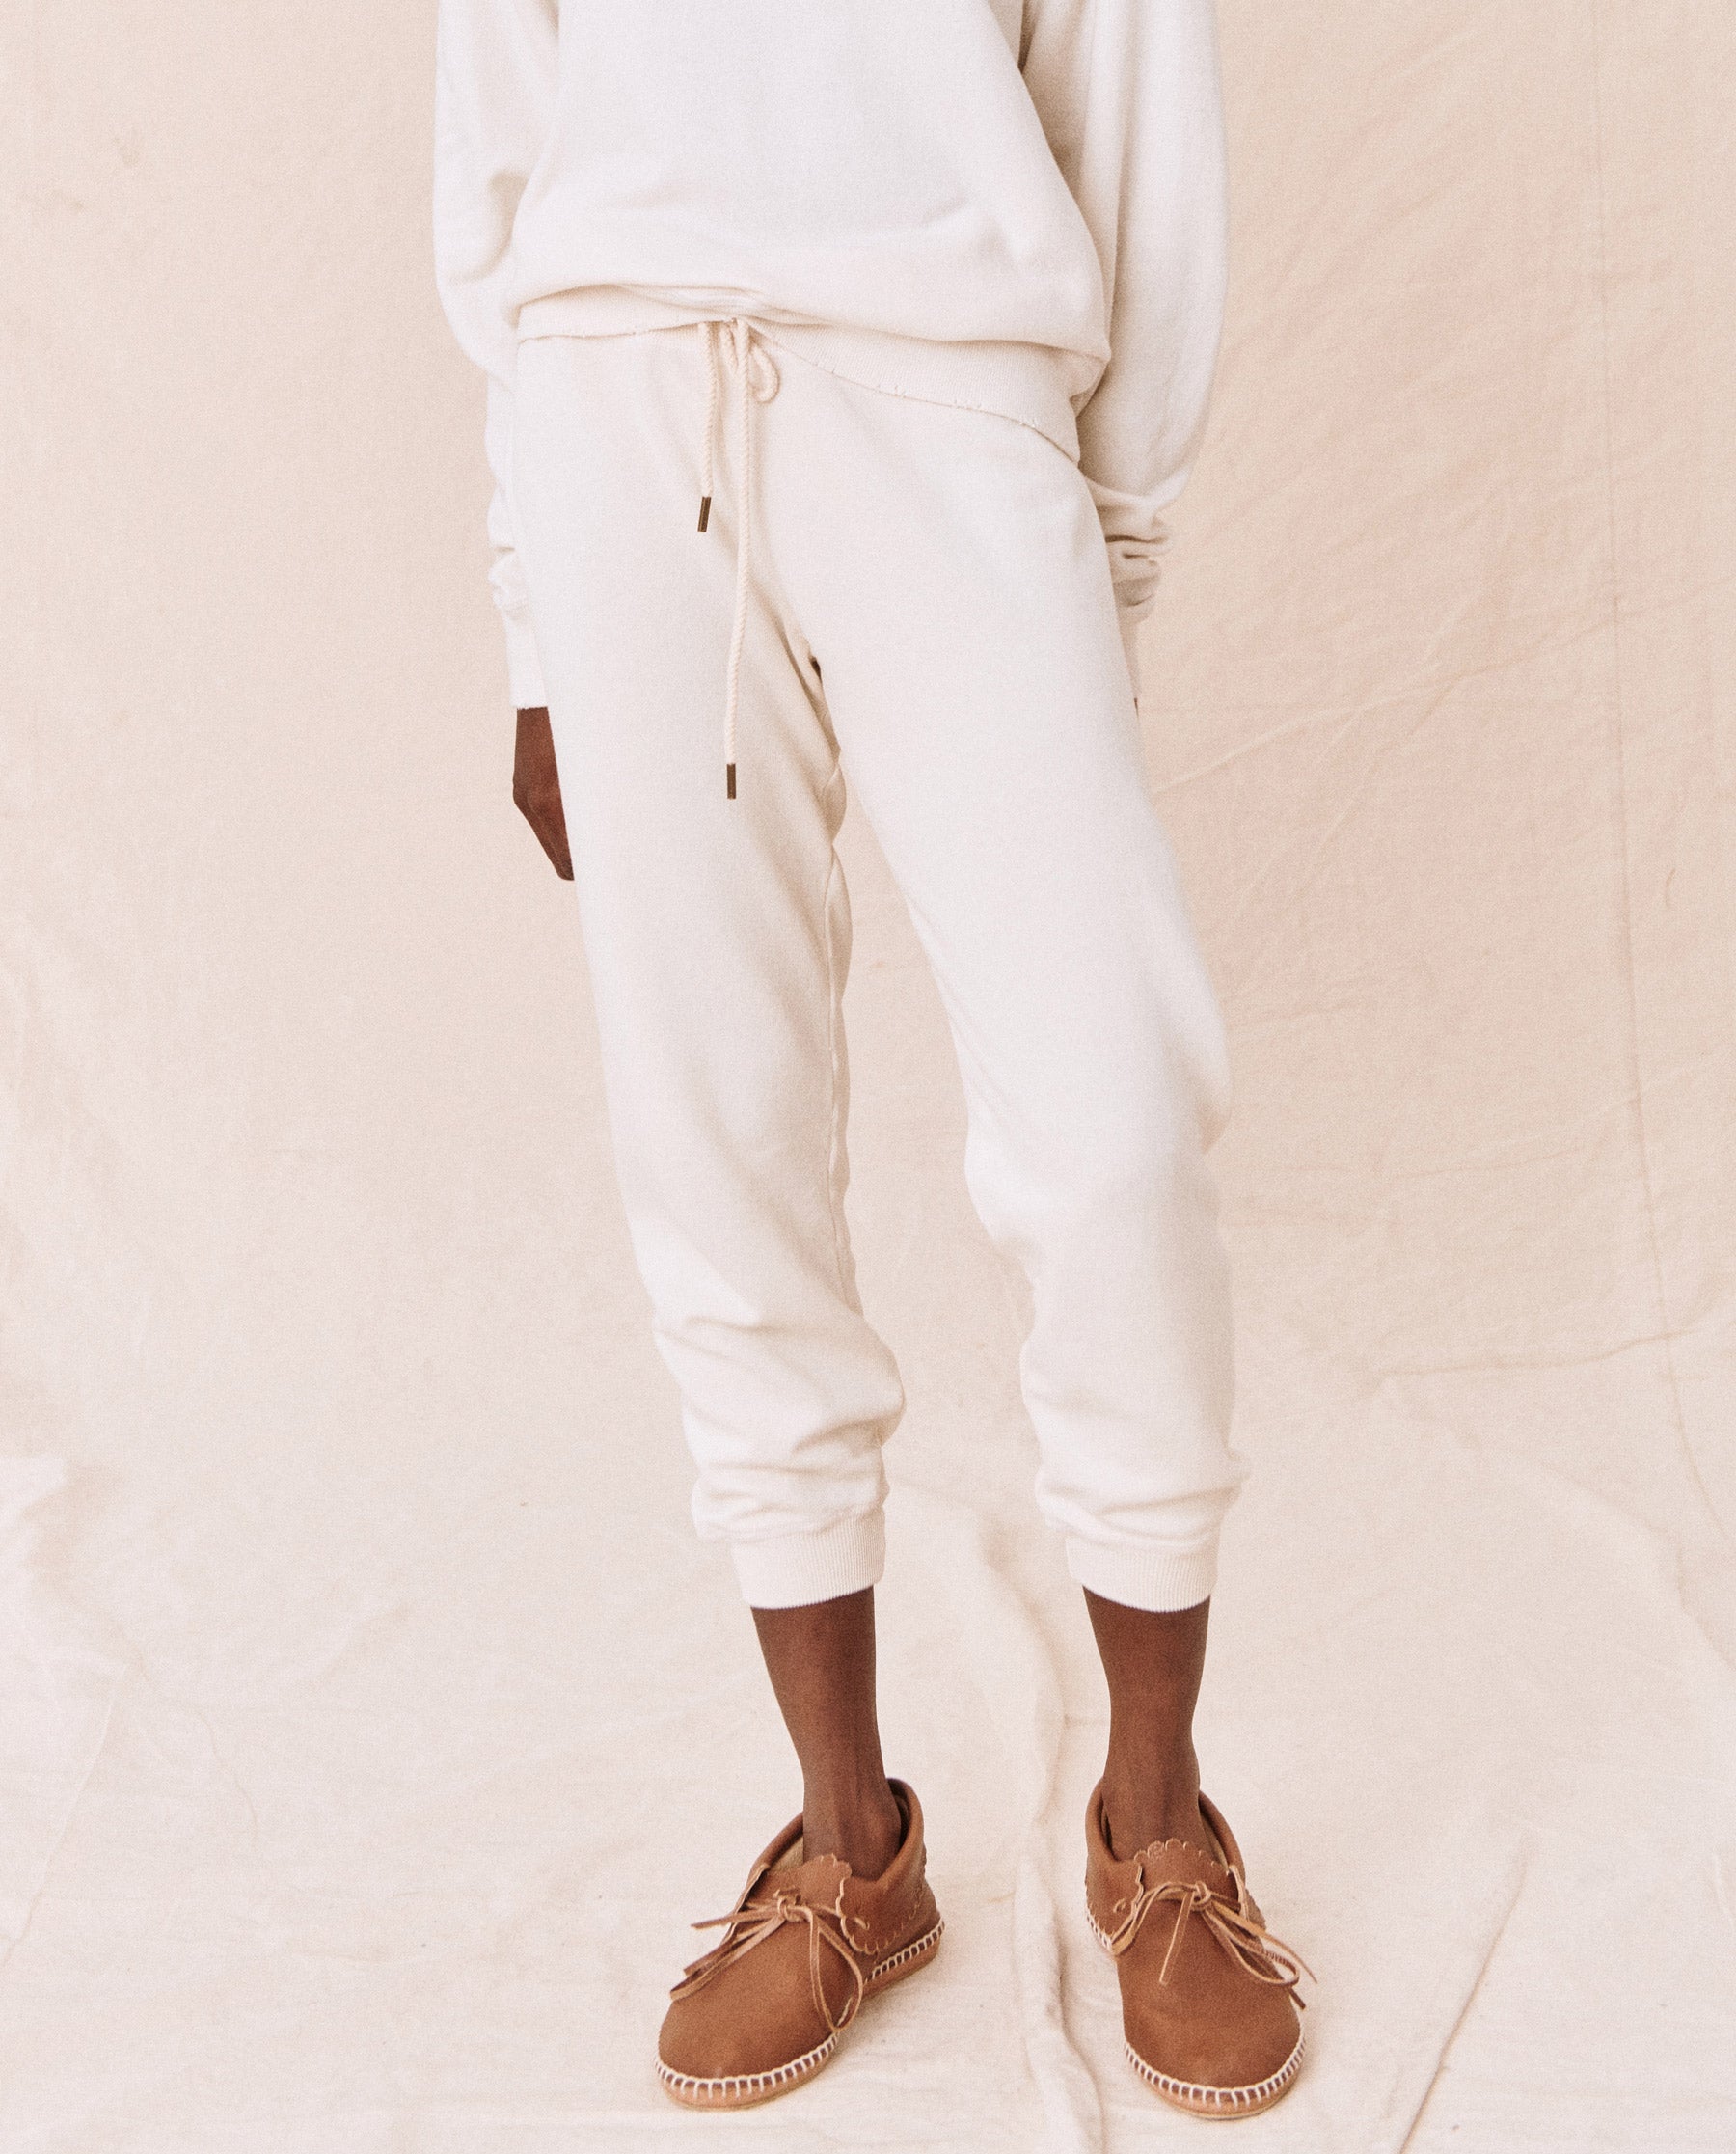 The Great - Cropped Sweatpant Rust Wishweed Embroidery - Alhambra